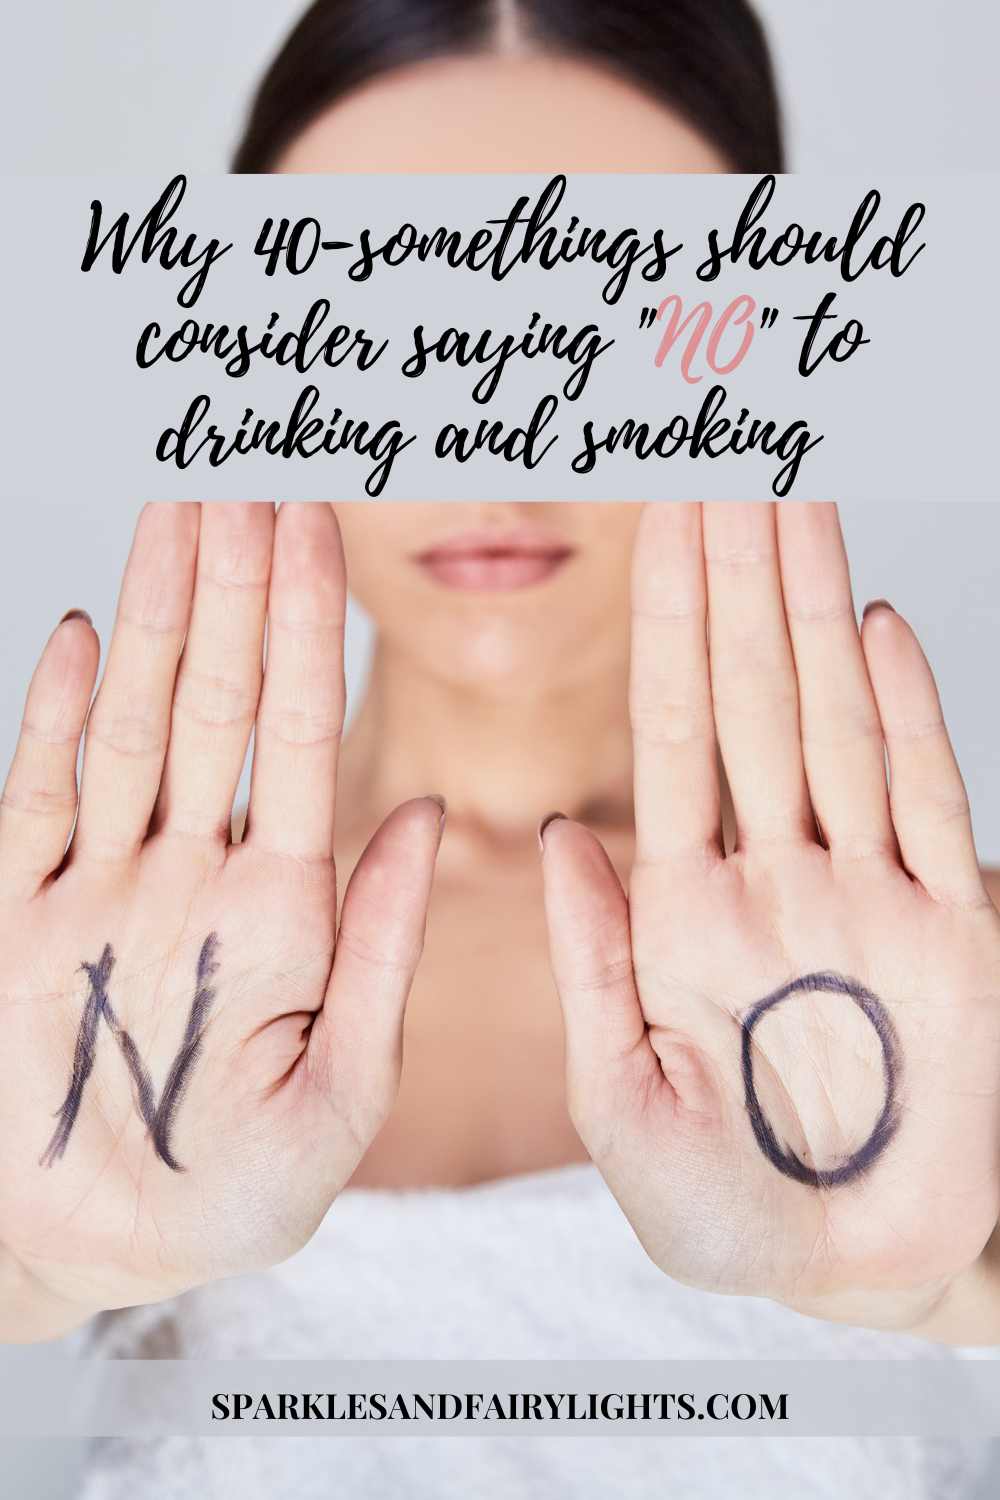 Why 40-somethings should consider saying "no" to drinking and smoking